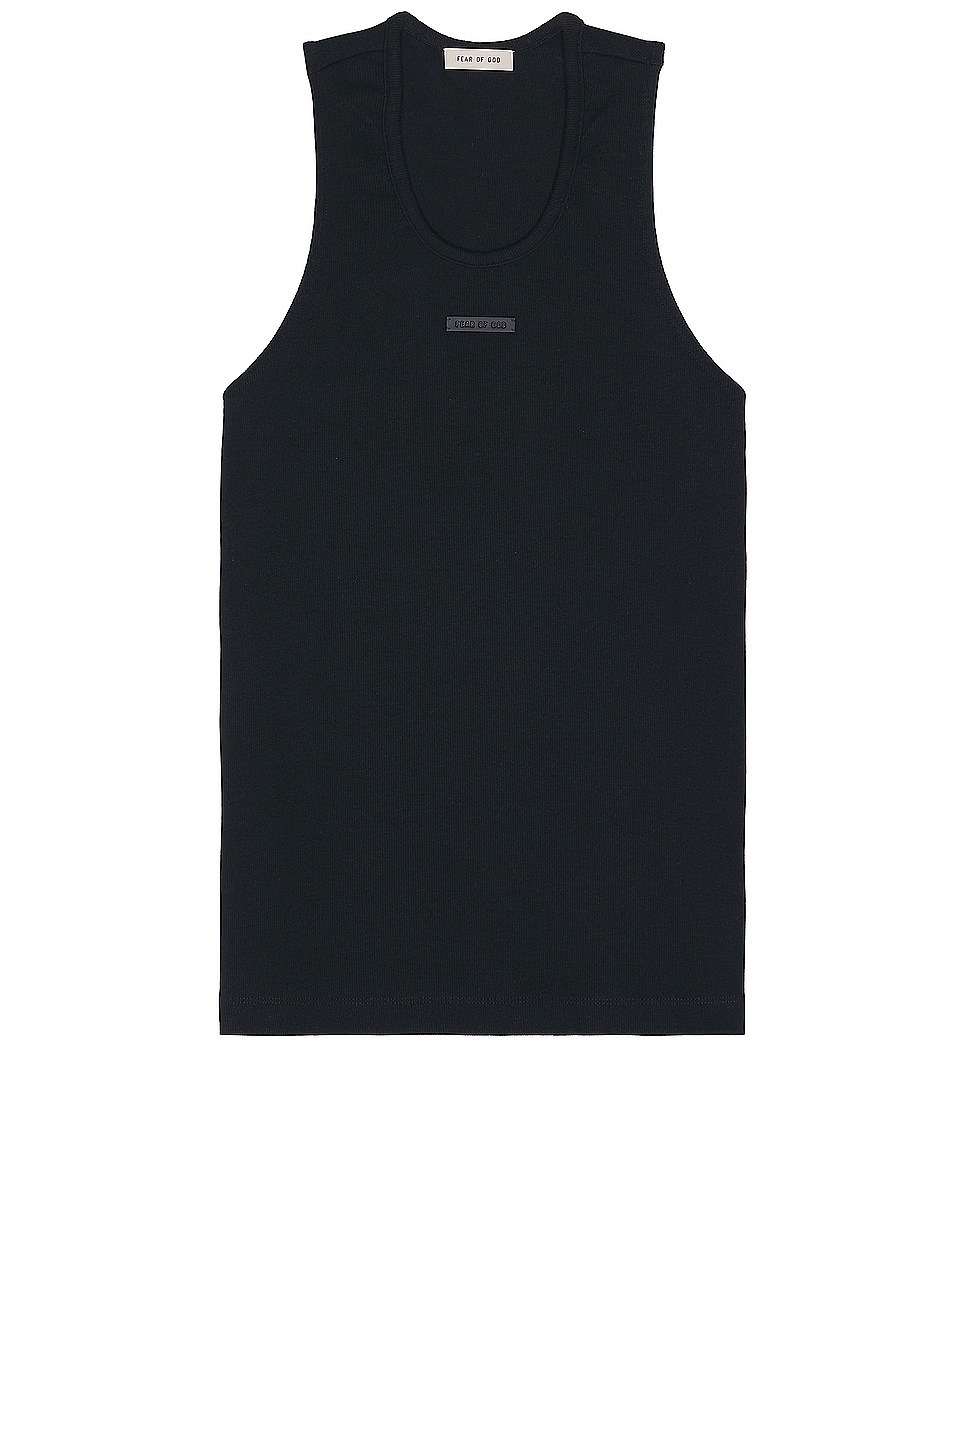 Image 1 of Fear of God Ribbed Tank in Black